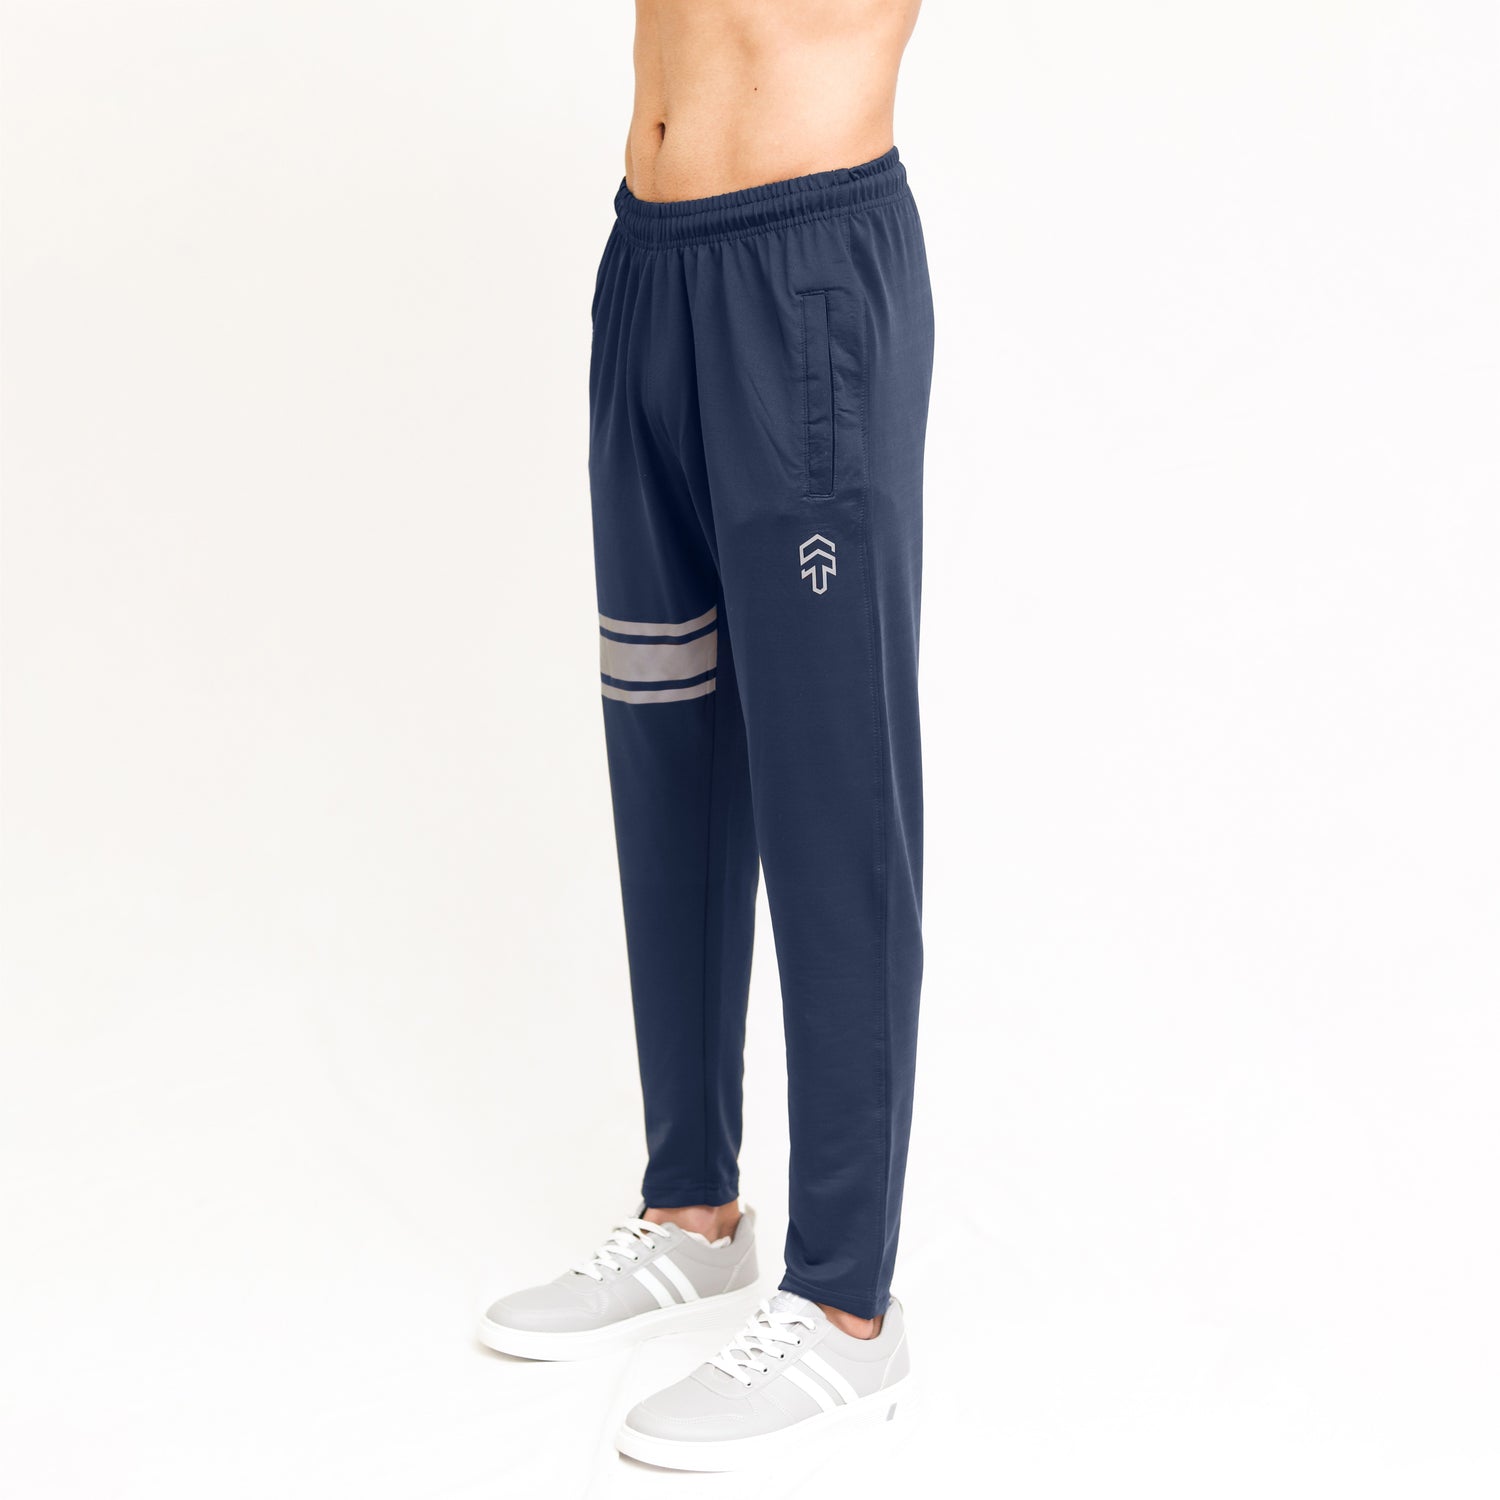 Navy Lycra Quick Dry Trouser with Three Stripes